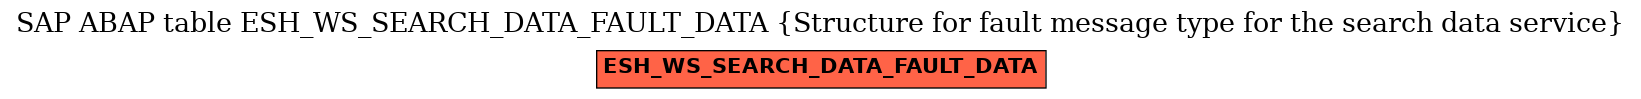 E-R Diagram for table ESH_WS_SEARCH_DATA_FAULT_DATA (Structure for fault message type for the search data service)